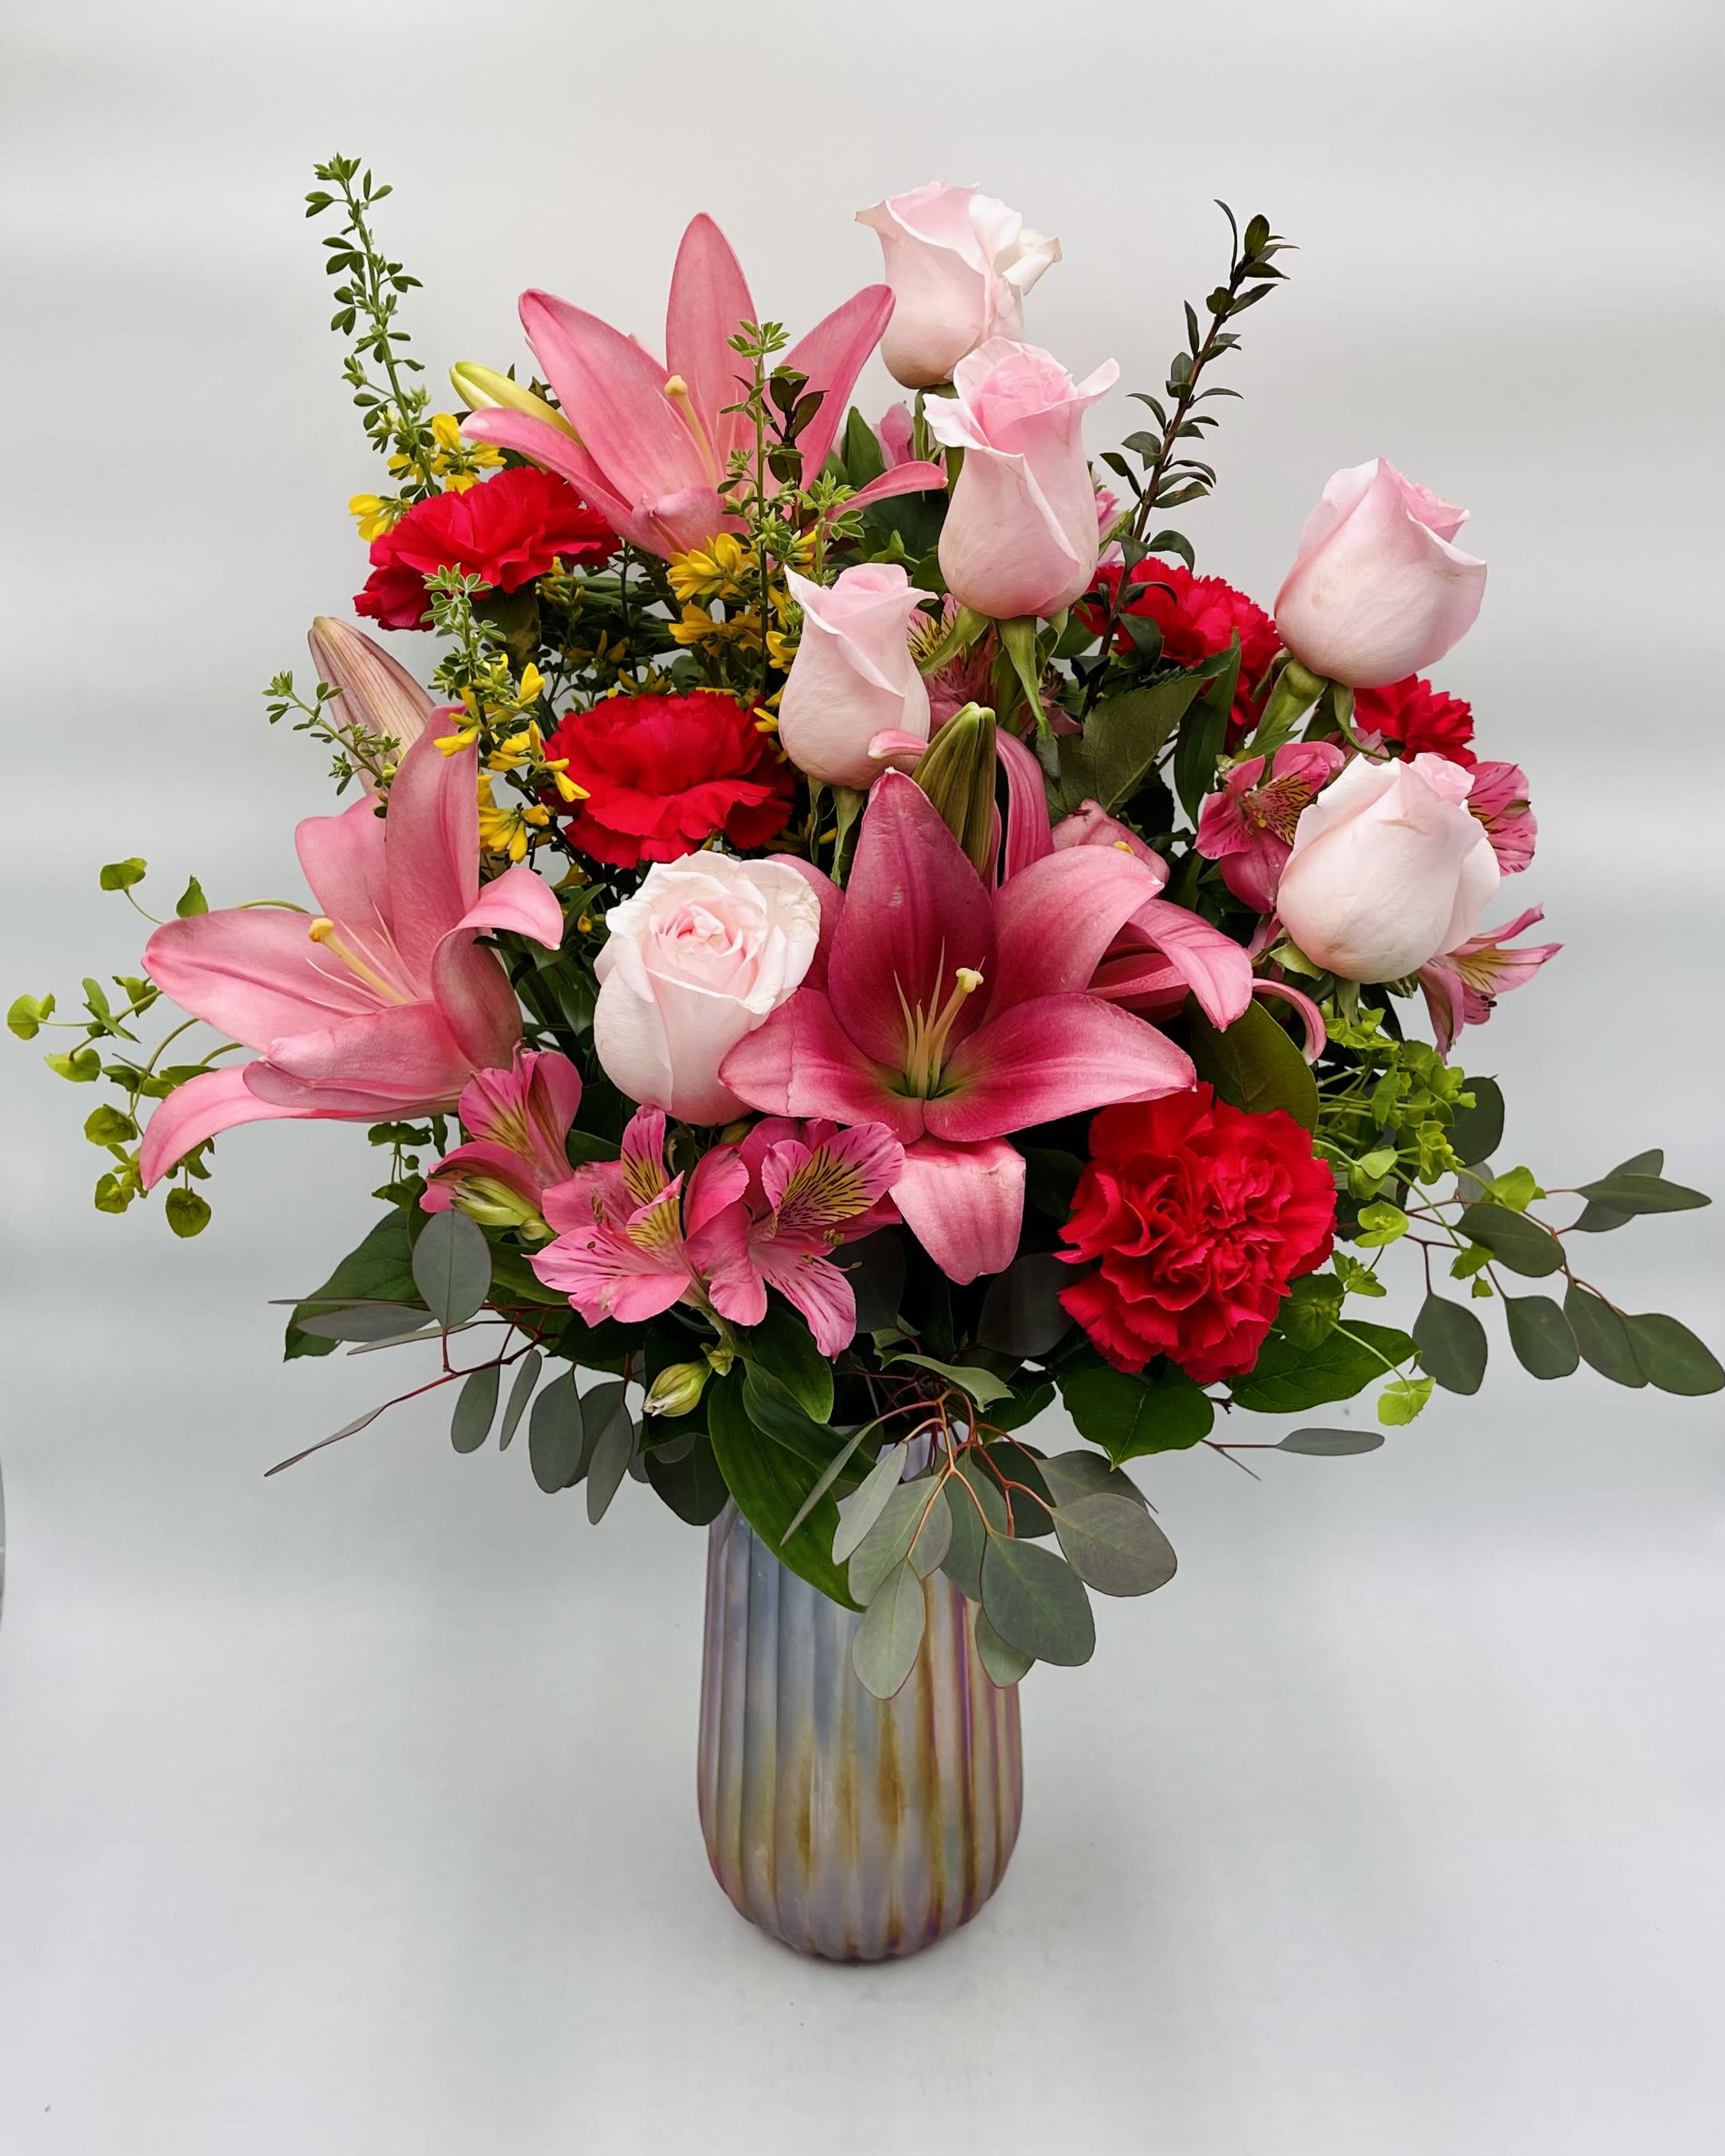 Iridescent Bouquet - Mother's Day - Mom will adore this gorgeous bouquet featuring pink roses and blooms overflowing from a luxurious, iridescent vase.  Arrangement includes pink roses, lilies, alstromeria, red carnations, and assorted greenery in a pink iridescent vase.  